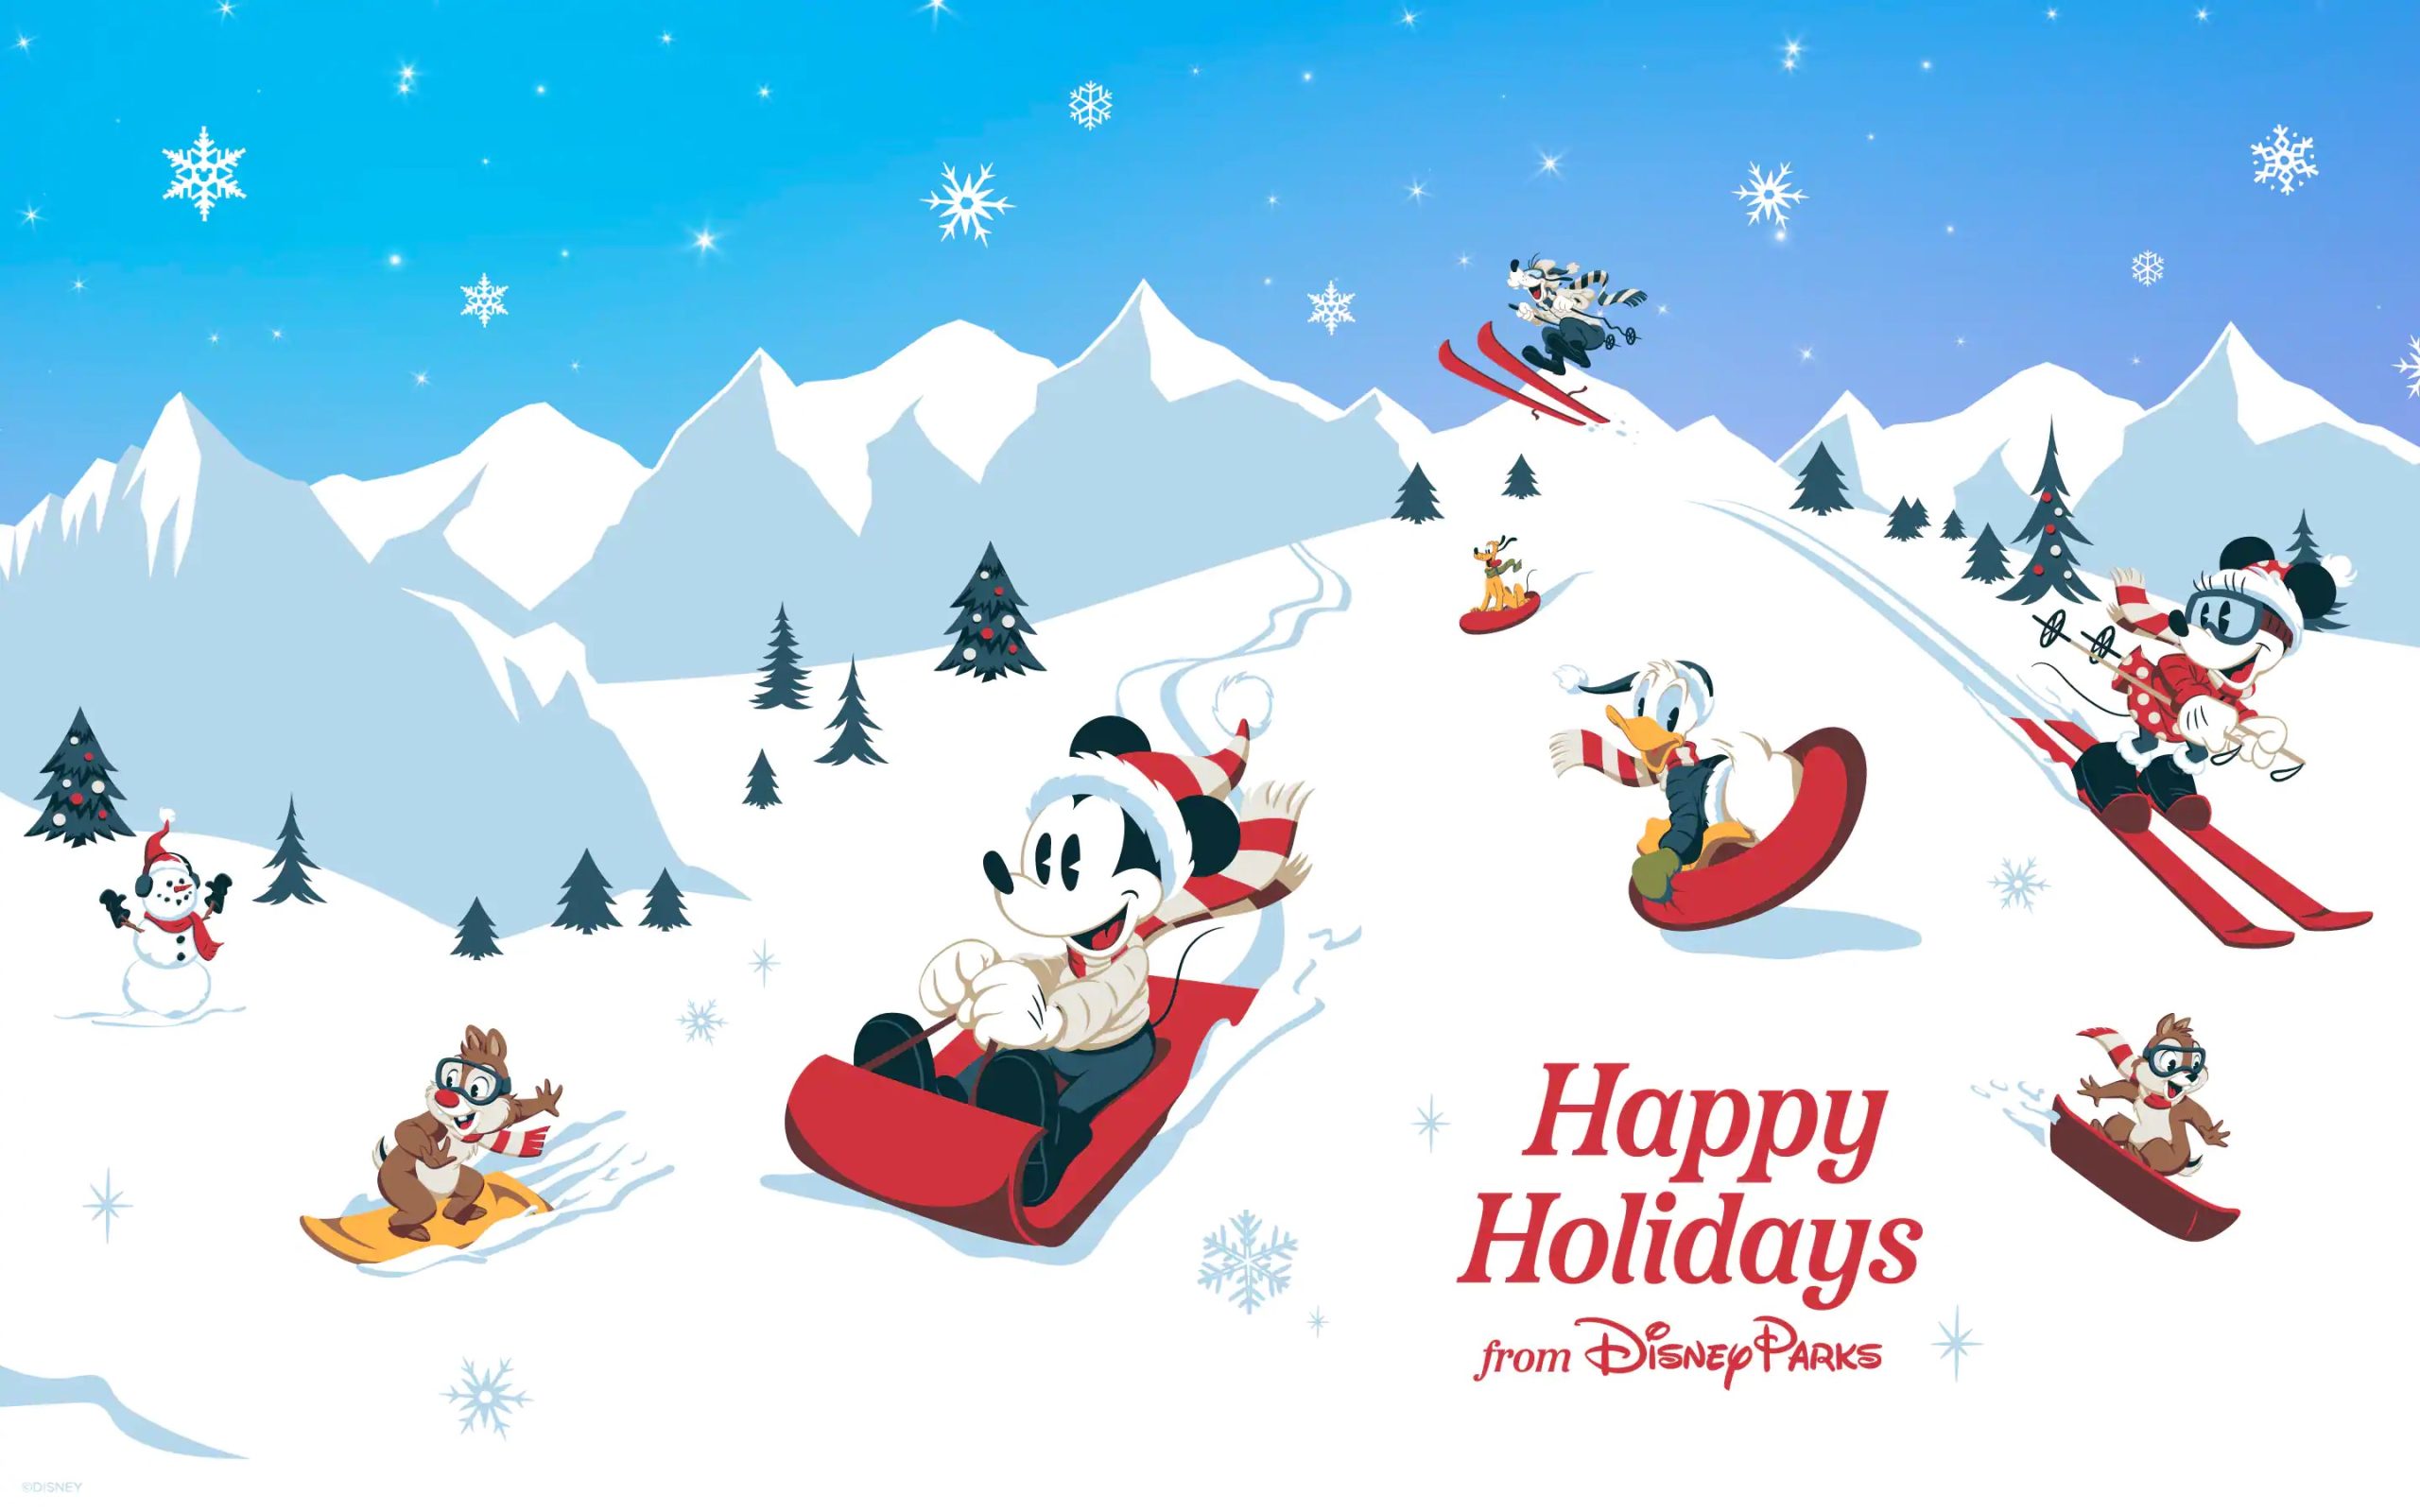 Download or Print Holiday Wallpapers for Phone Desktop and Case